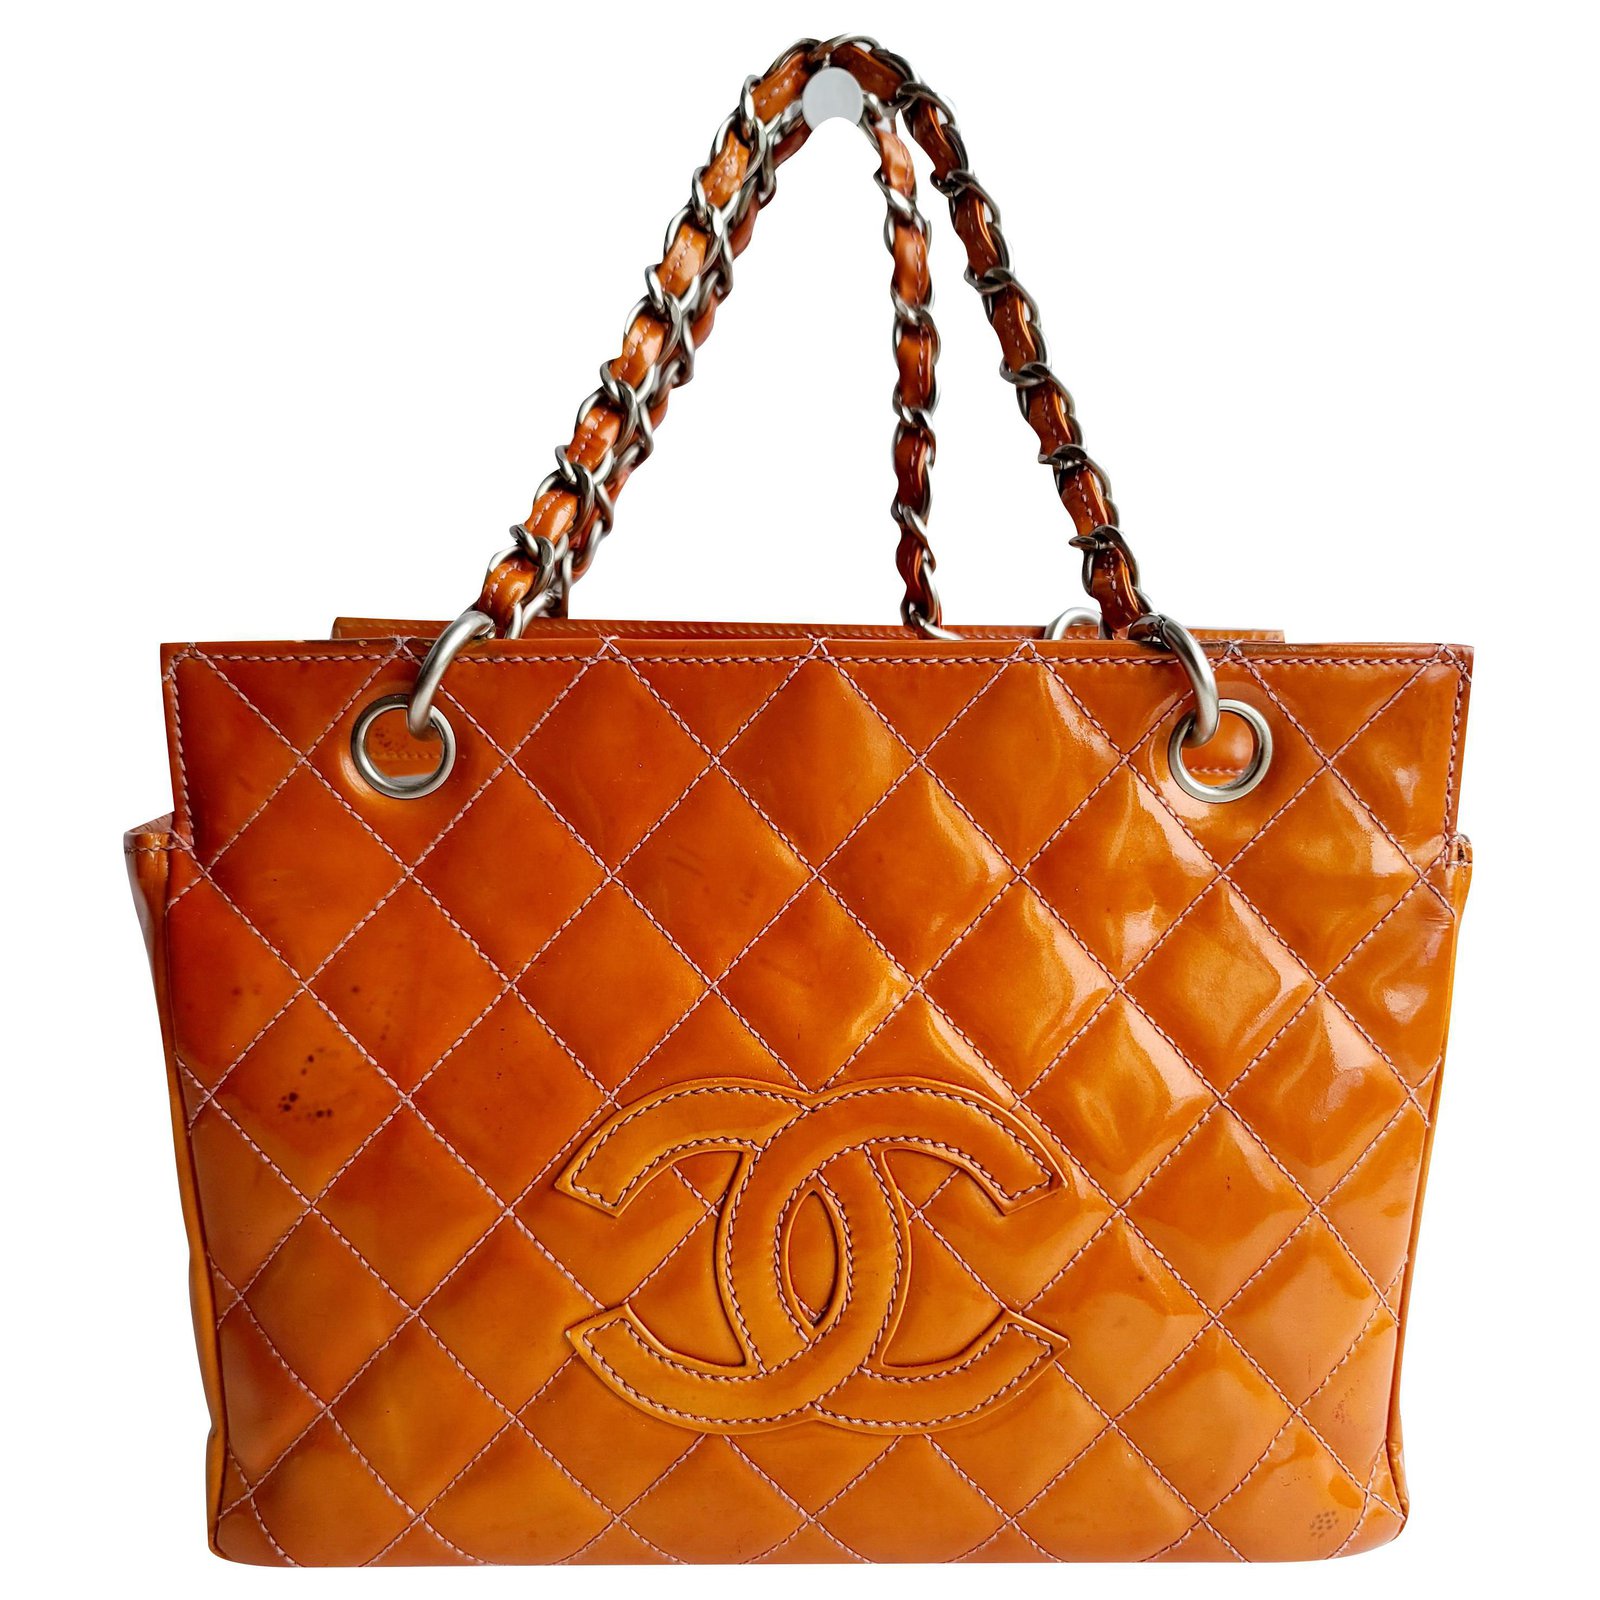 Trendy CC CHANEL Quilted Patent Leather Chain Hand Bag Orange ref